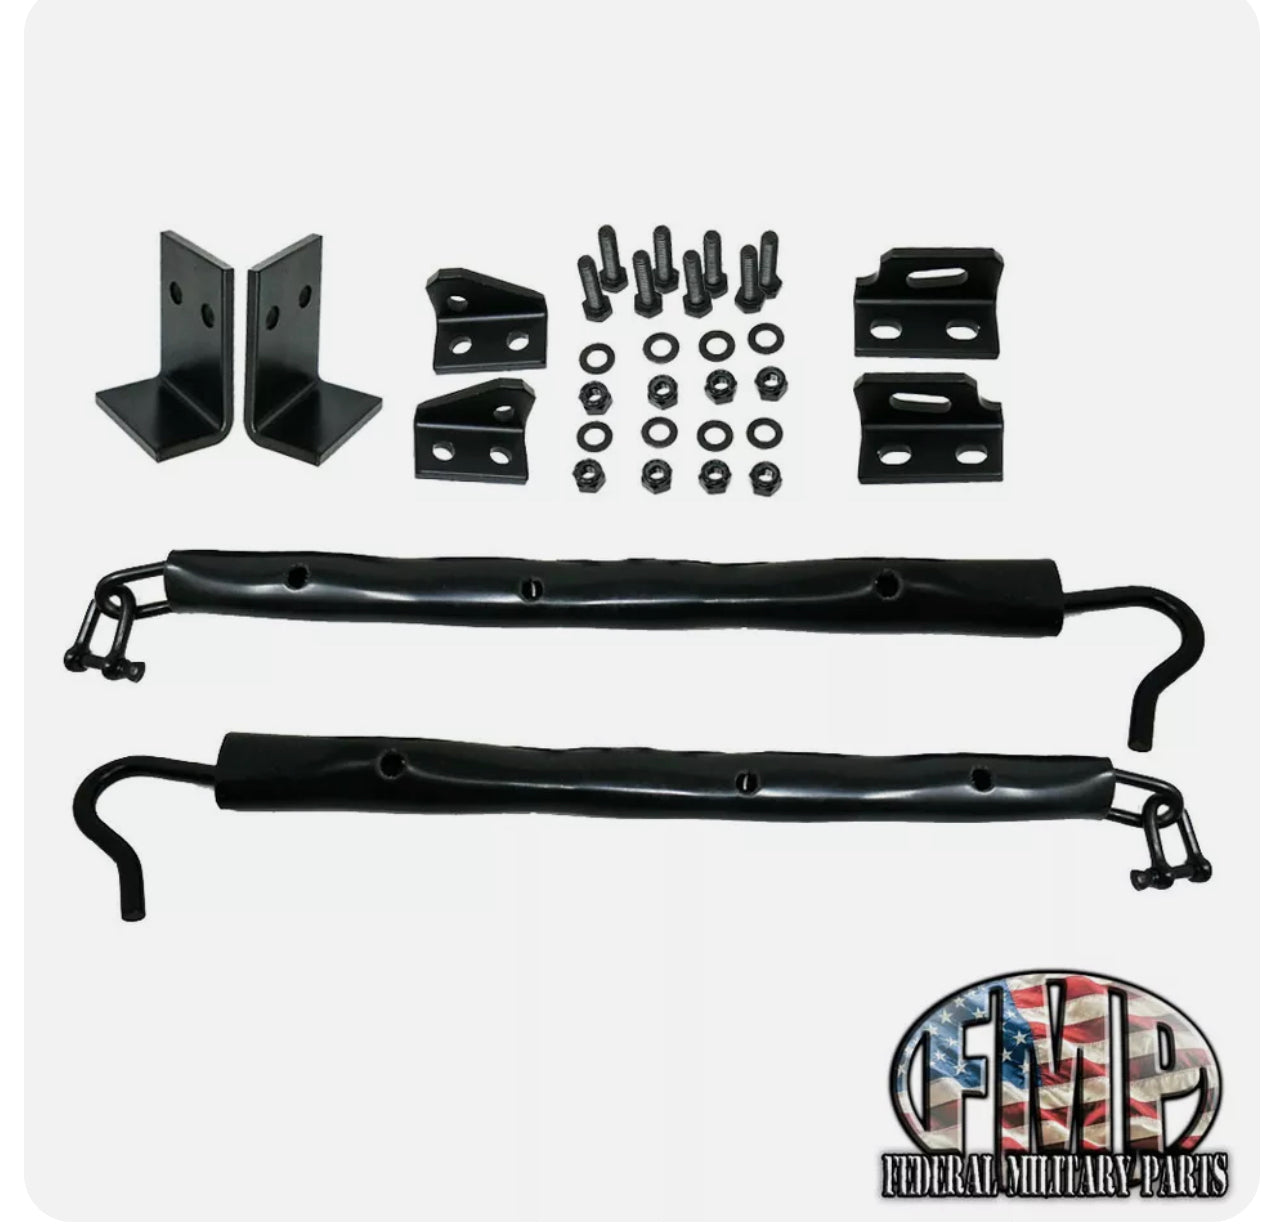 Tailgate Chains for Military Humvee - Complete Kit includes hardware